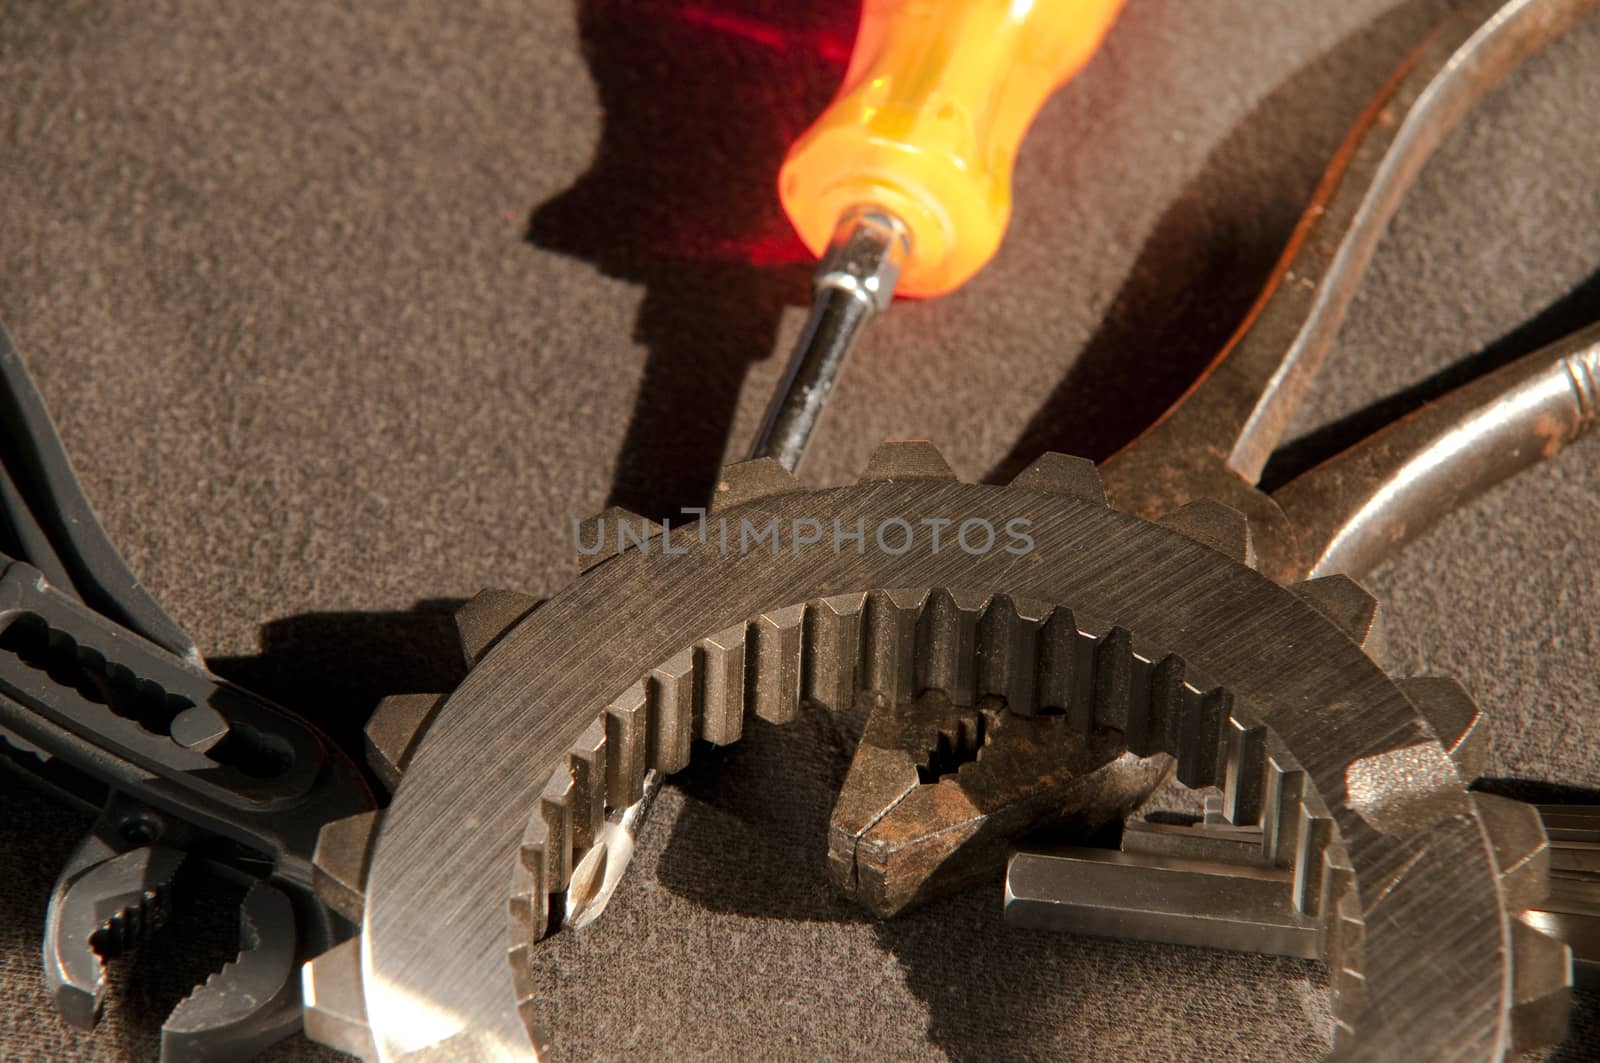 instruments, tools and clutch to perform work on mechanical parts